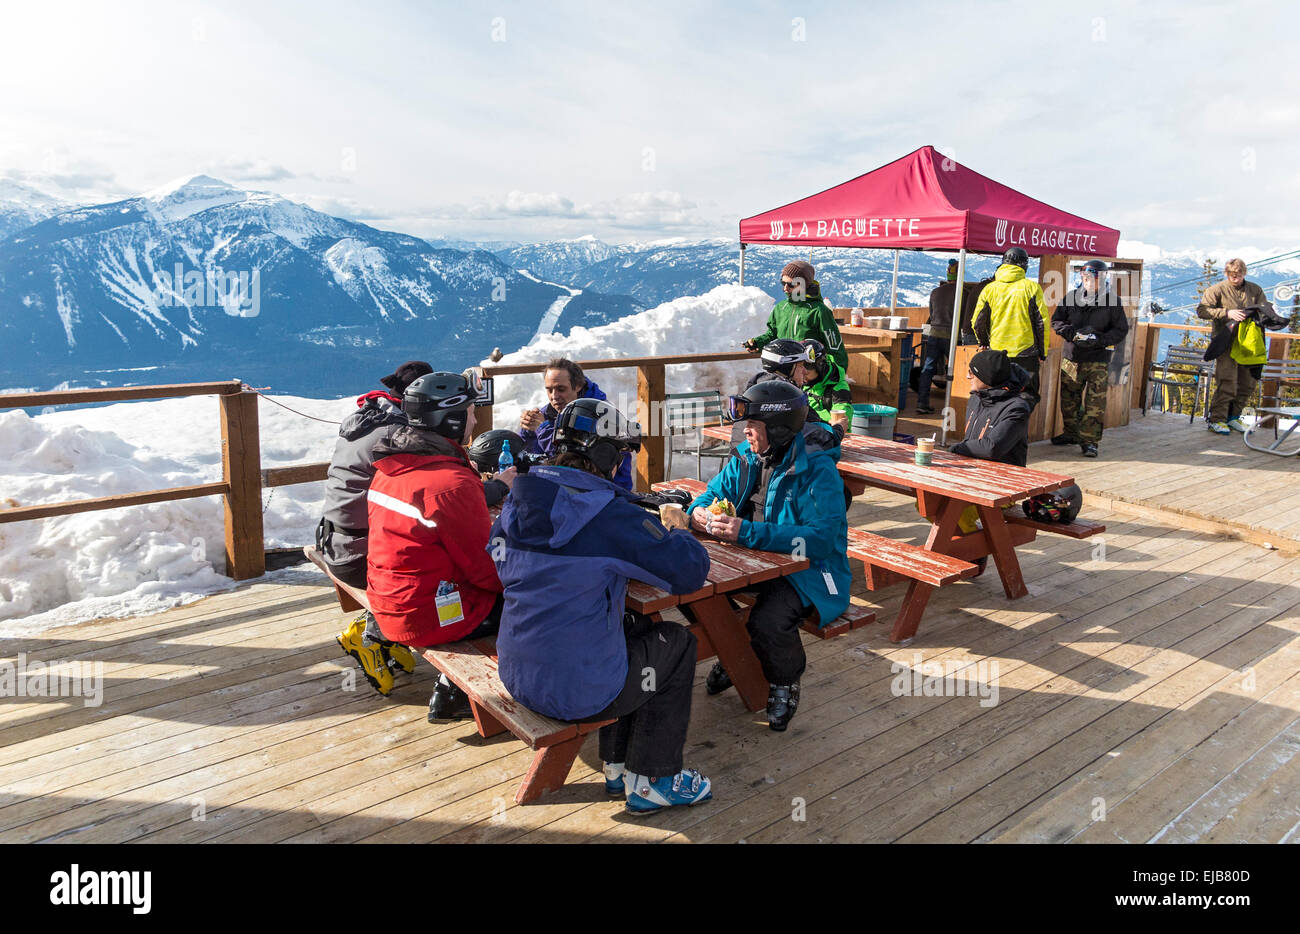 Mackenzie Outpost, mid mountain lunch deck at Revelstoke ski resort. The deck has a stunning view of the Monashee mountains. Stock Photo